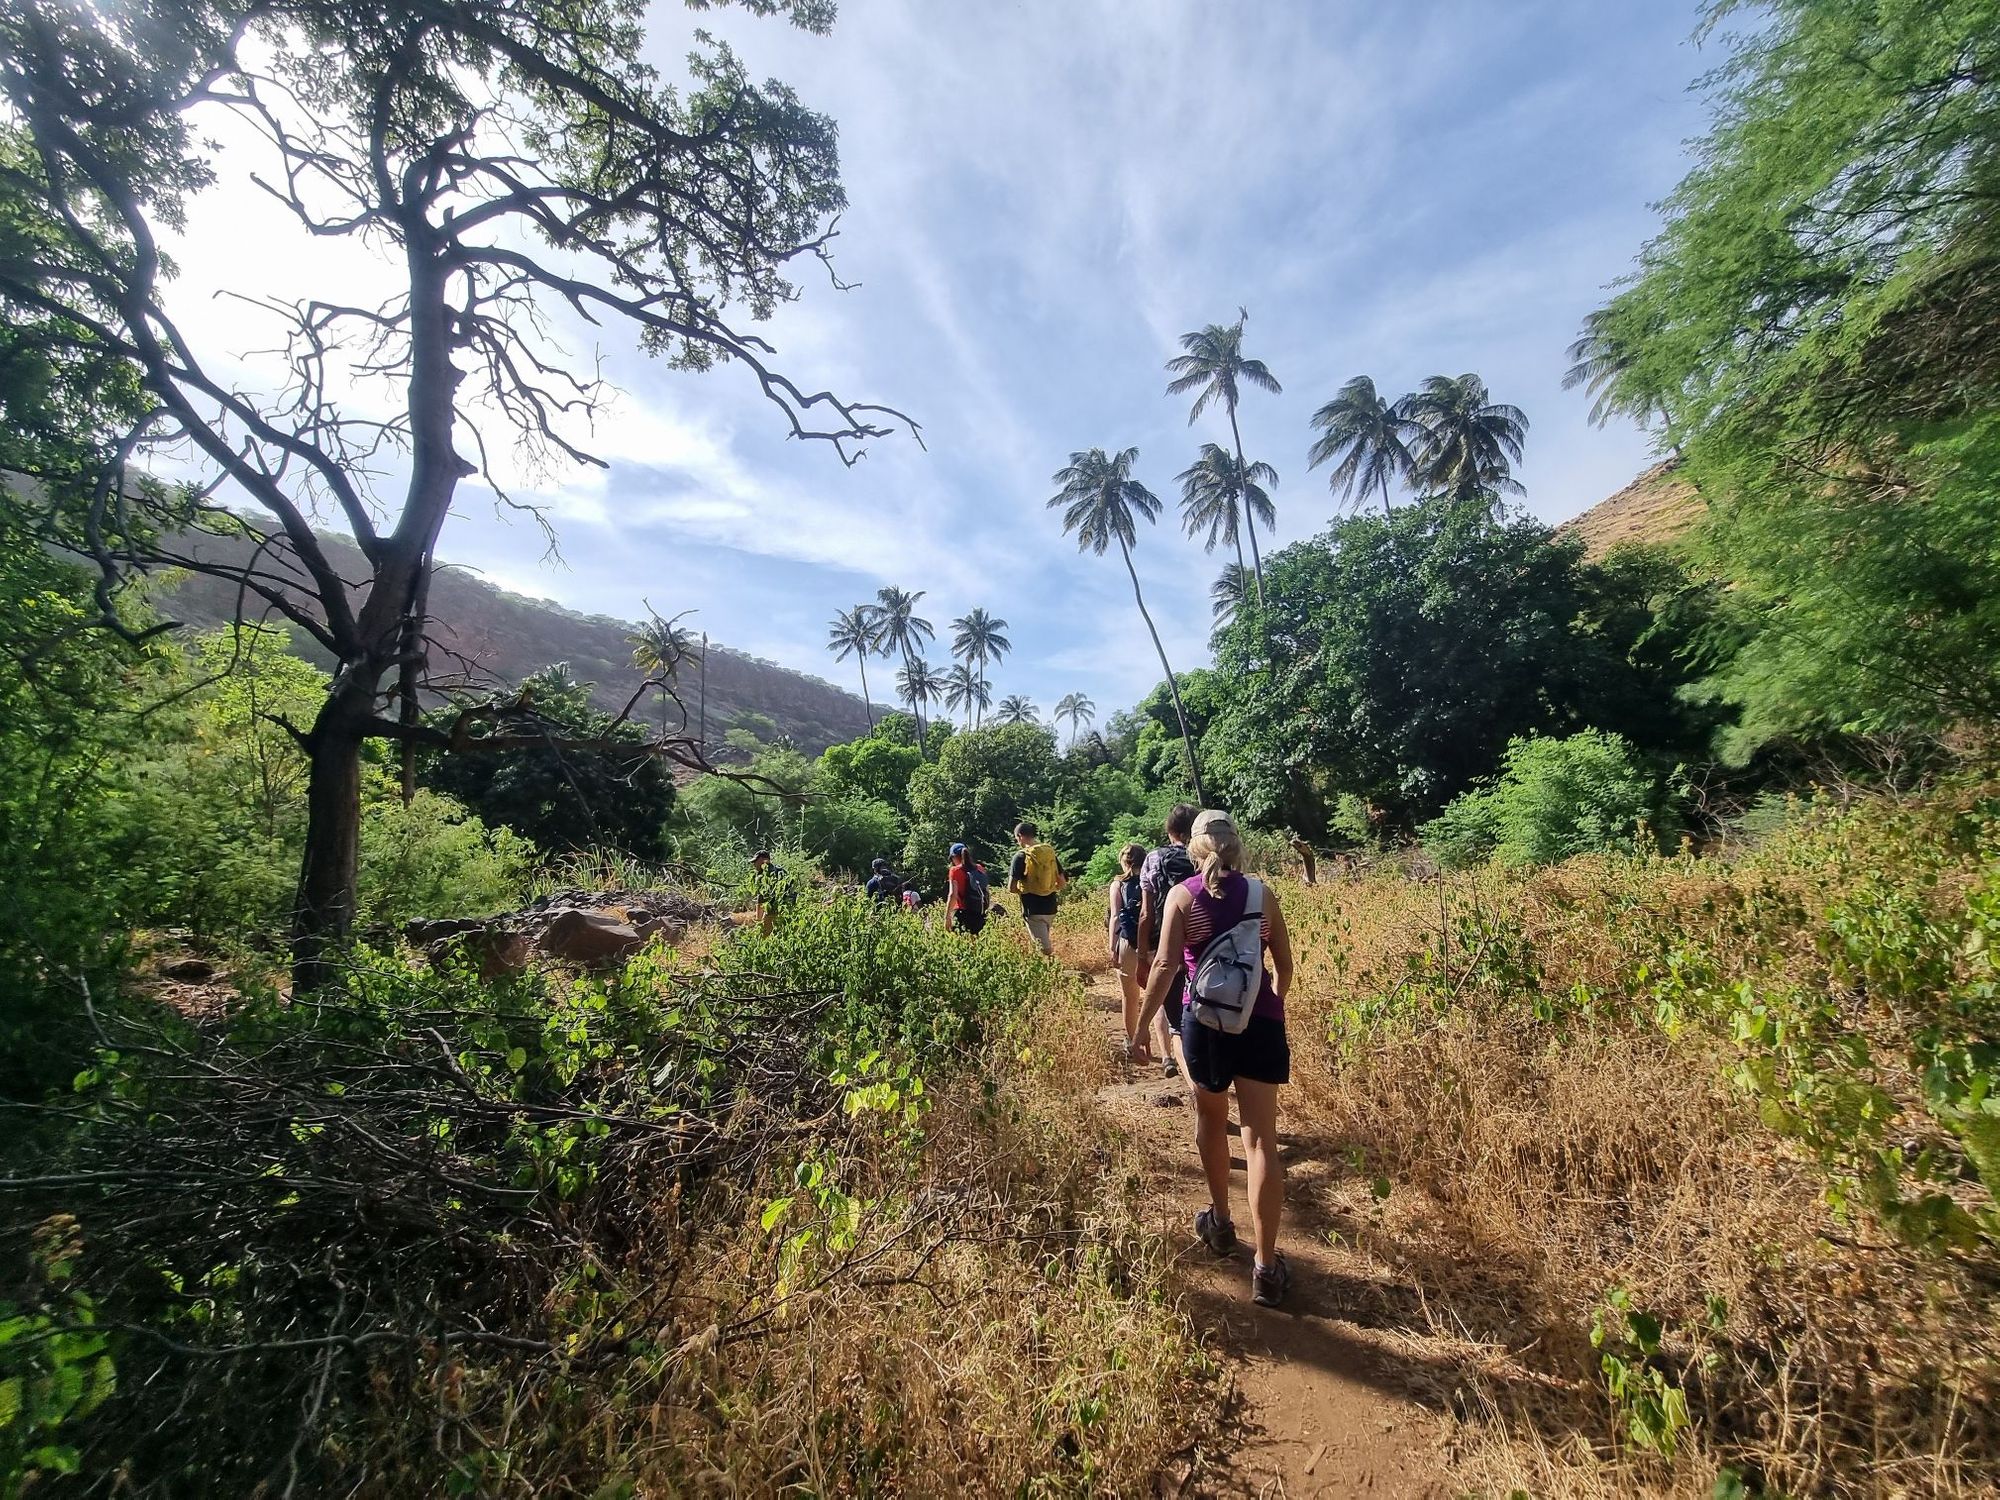 Hikers in the Calabaceira Valley, Santiago, Cape Verde